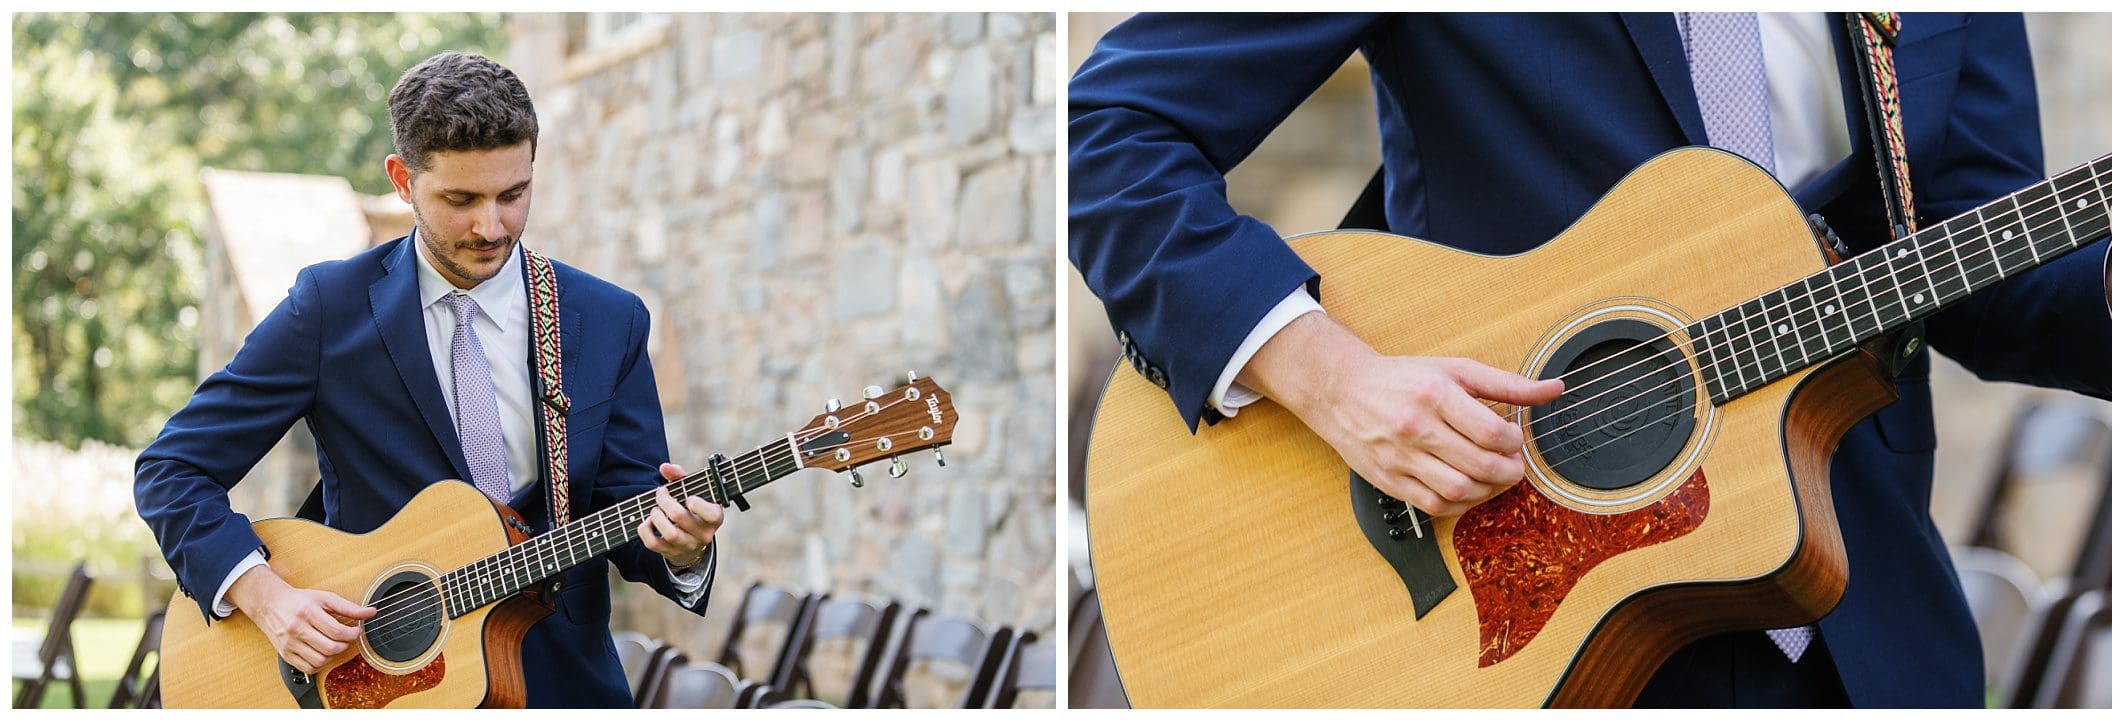 Two pictures of a man playing an acoustic guitar.